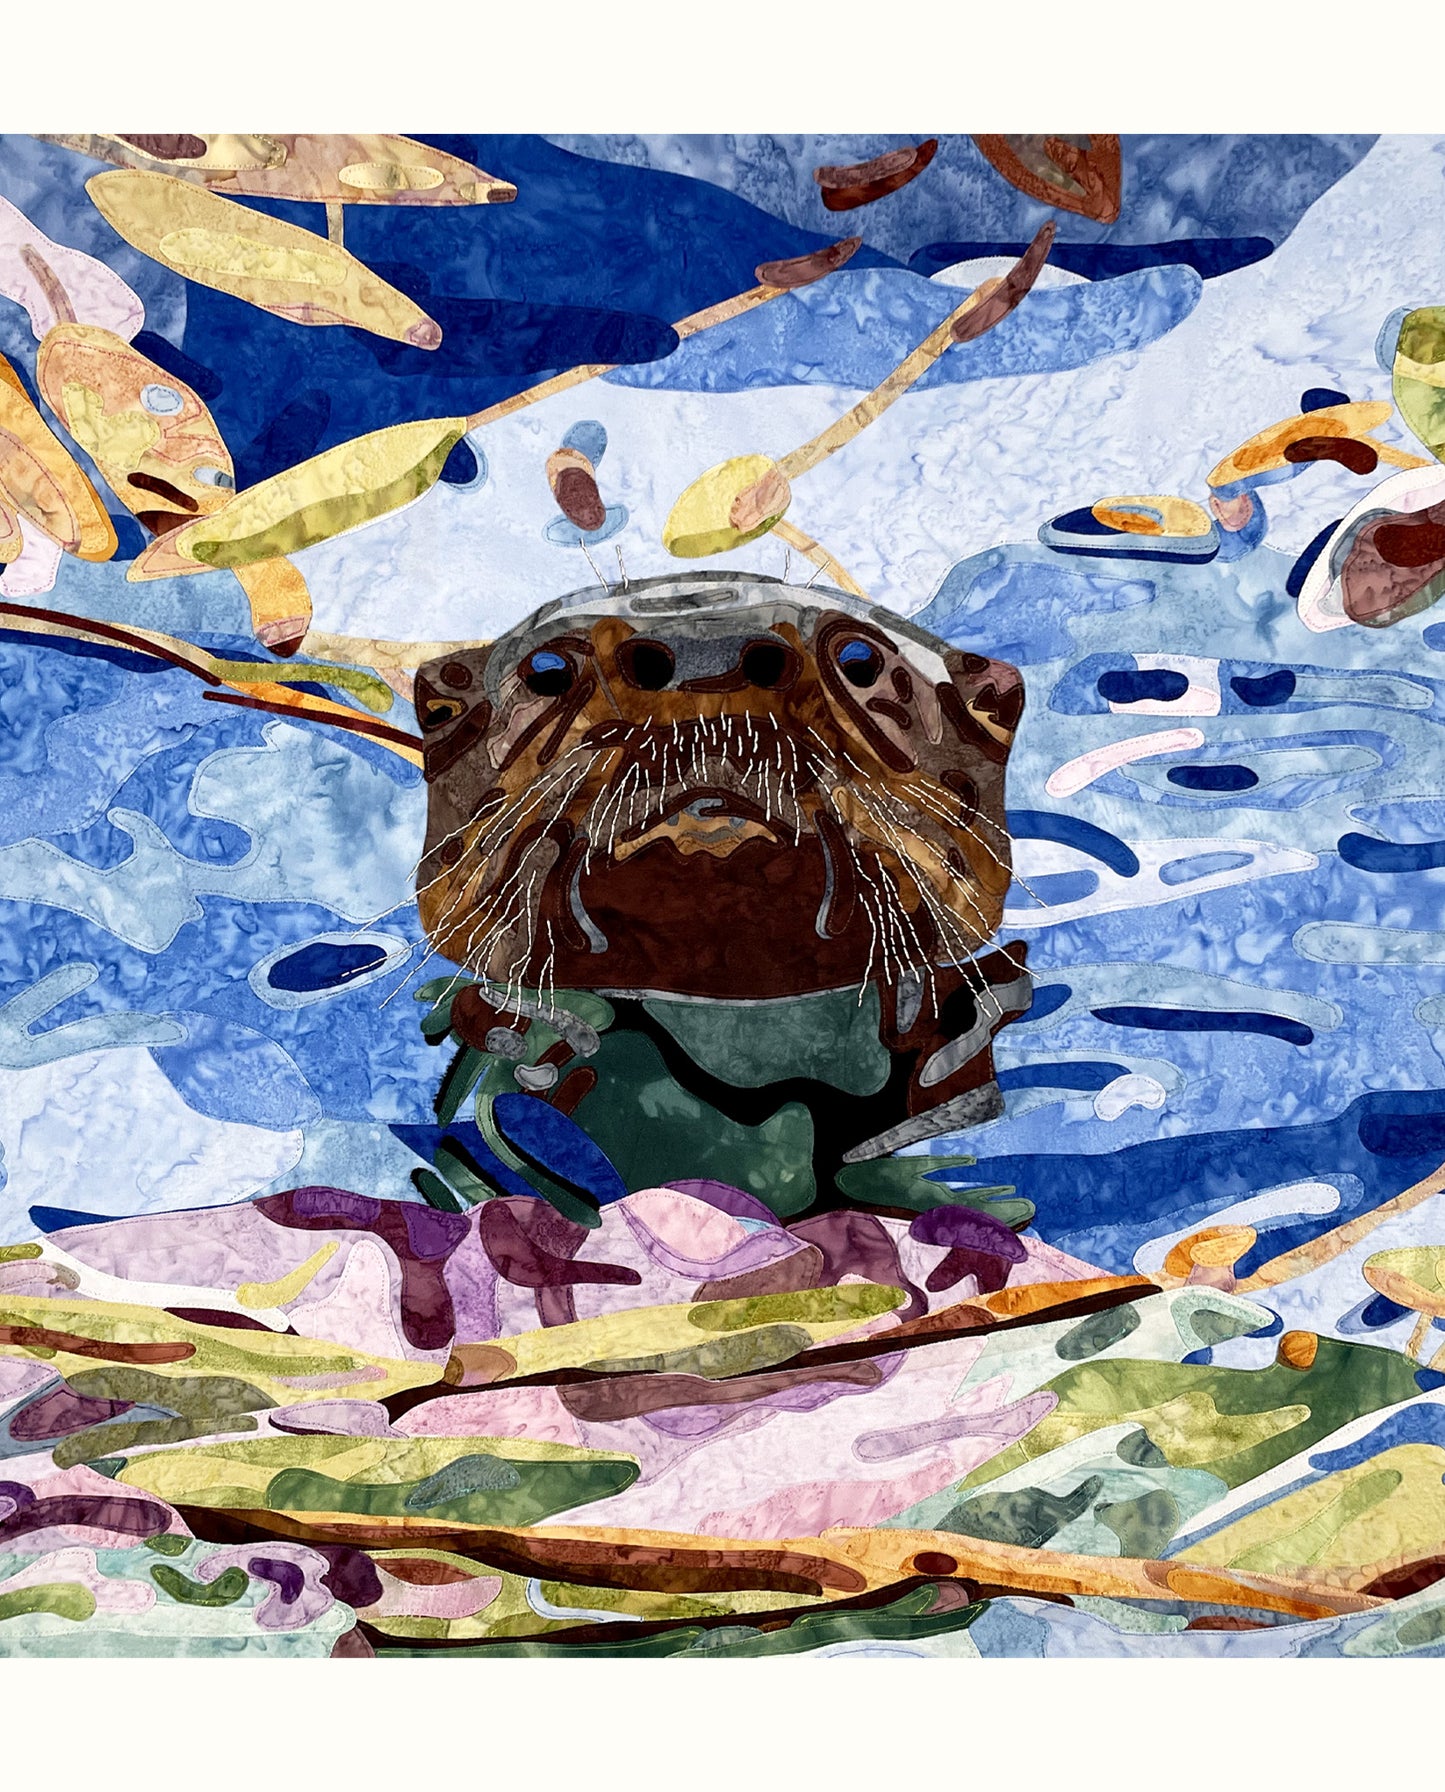 Fabric Collage Art - River Otter